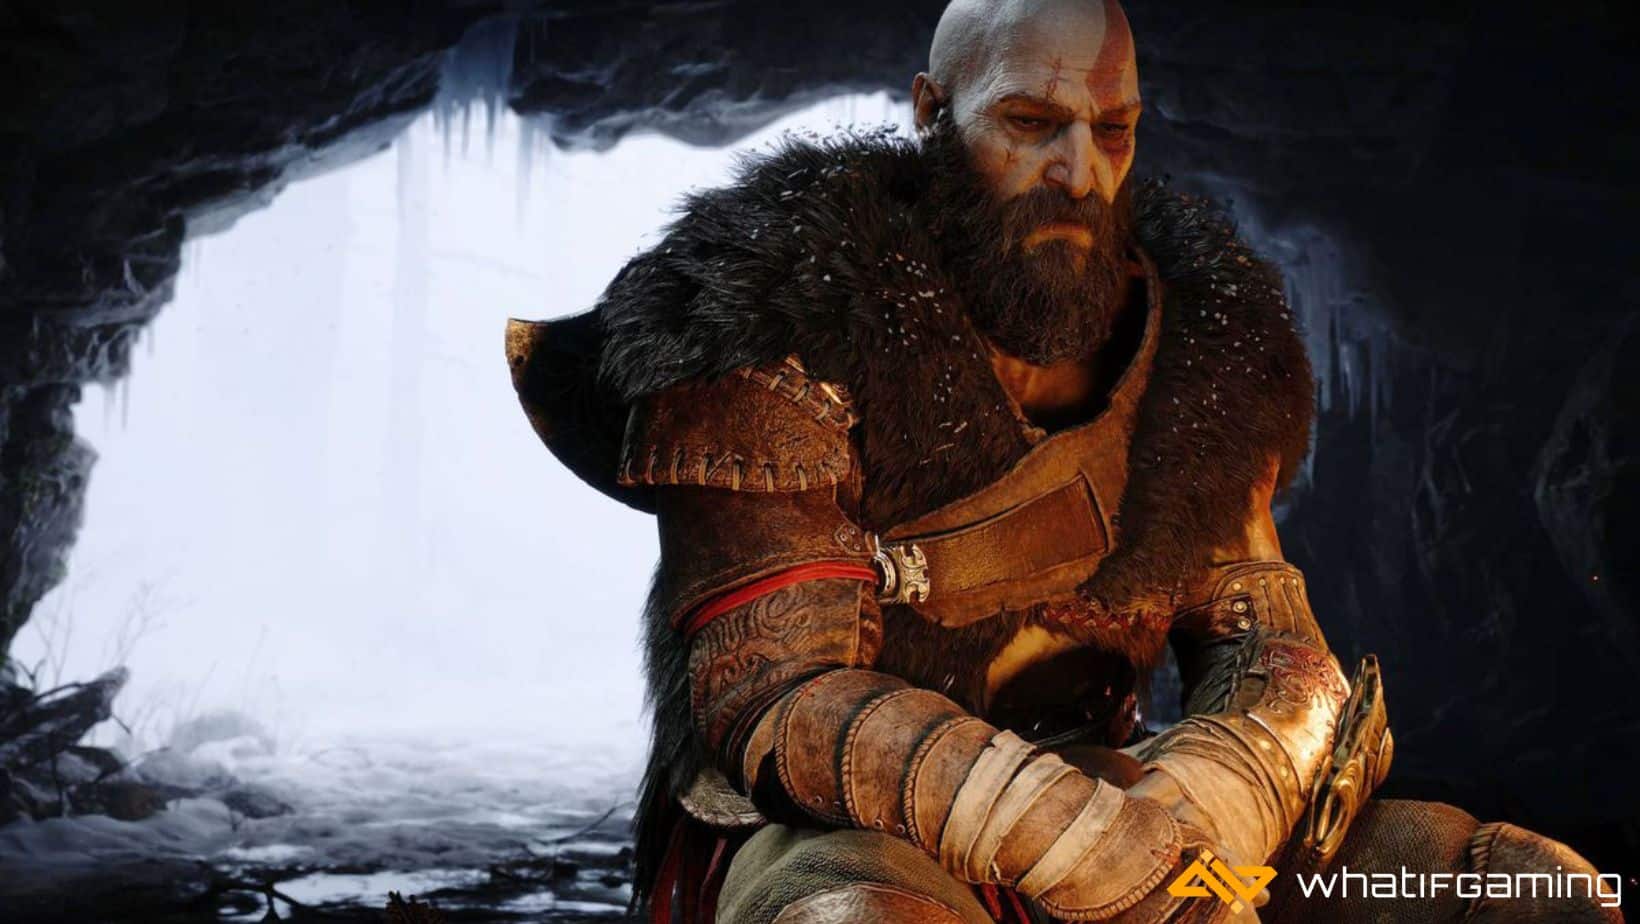 The latest entry in the God of War series, Ragnarok is a stunning game in terms of gameplay, story, characters, and graphics.